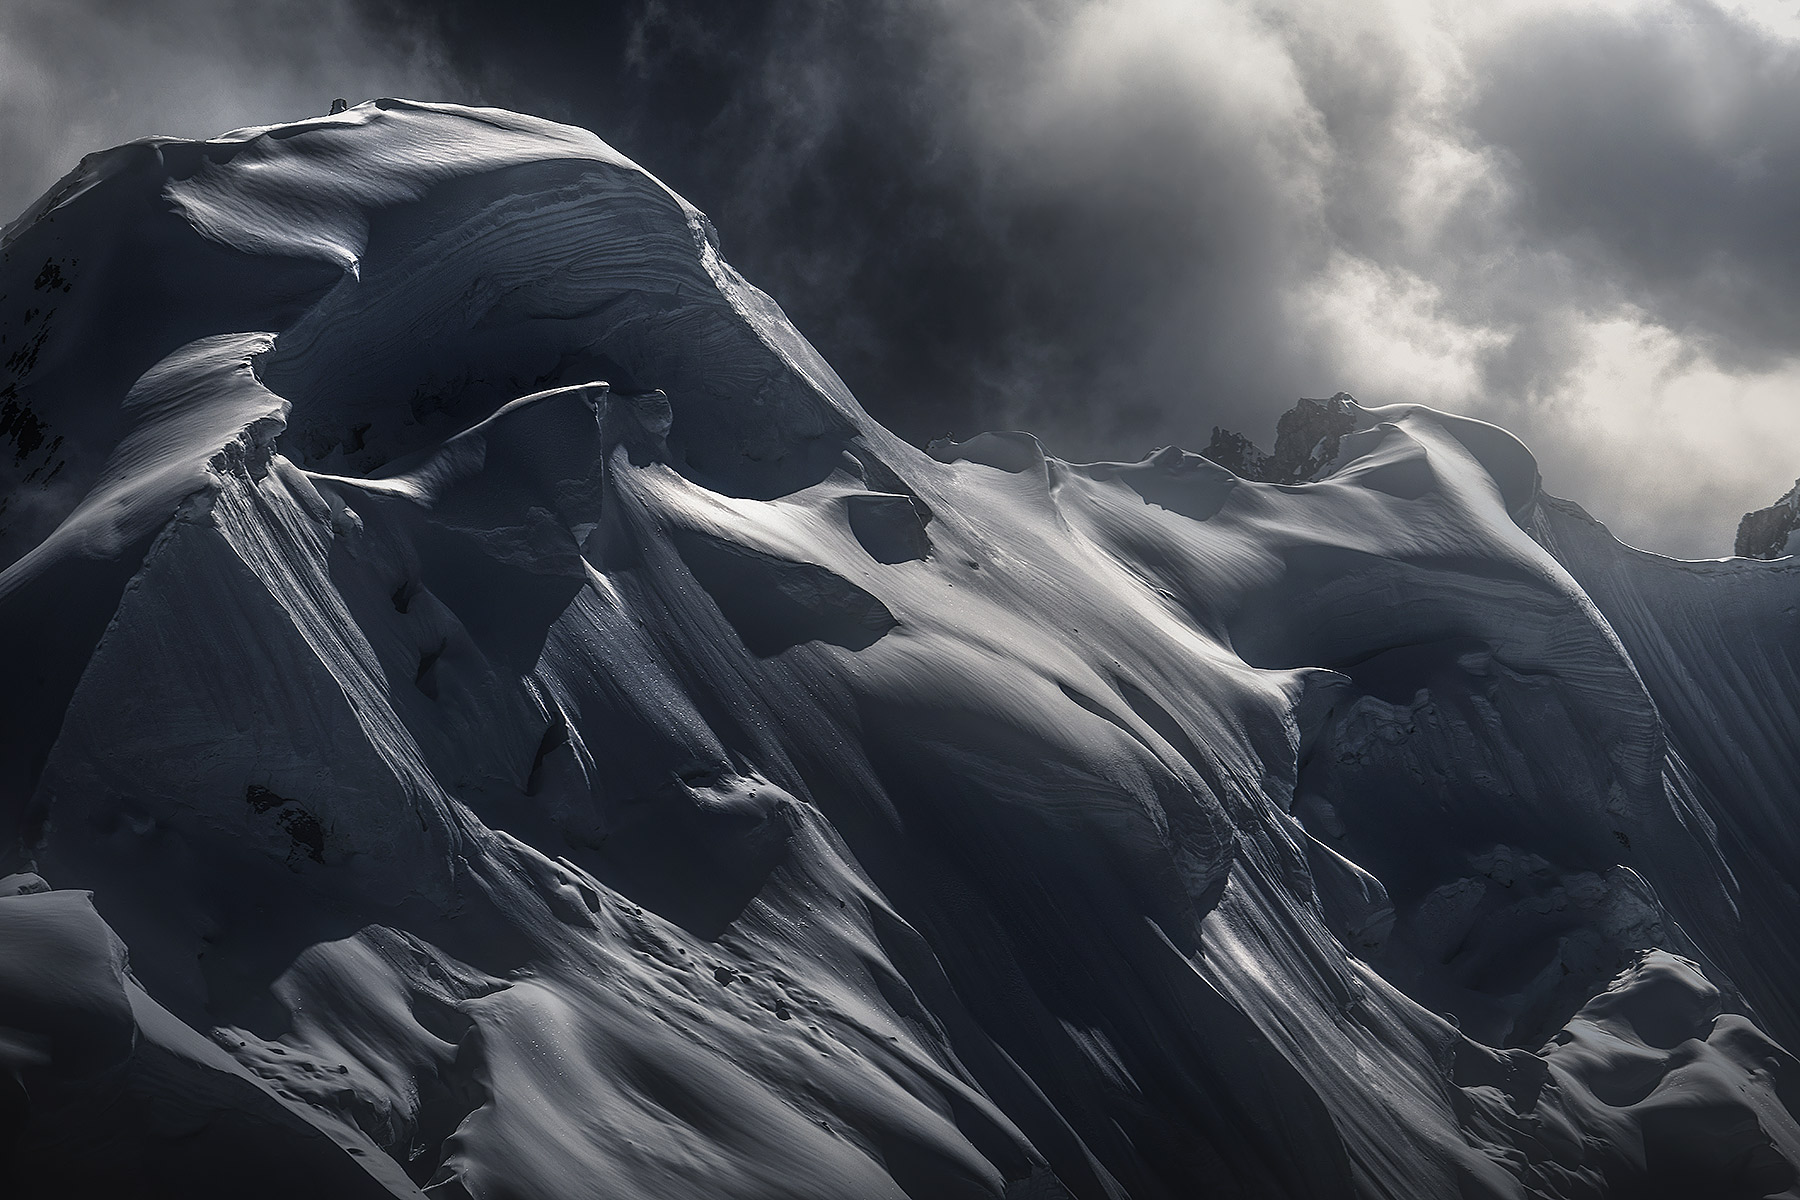 Snow cornices on the shoulders of King Peak, below mount Logan, Yukon at about 13,000ft. &nbsp;An intimate play of light gave...